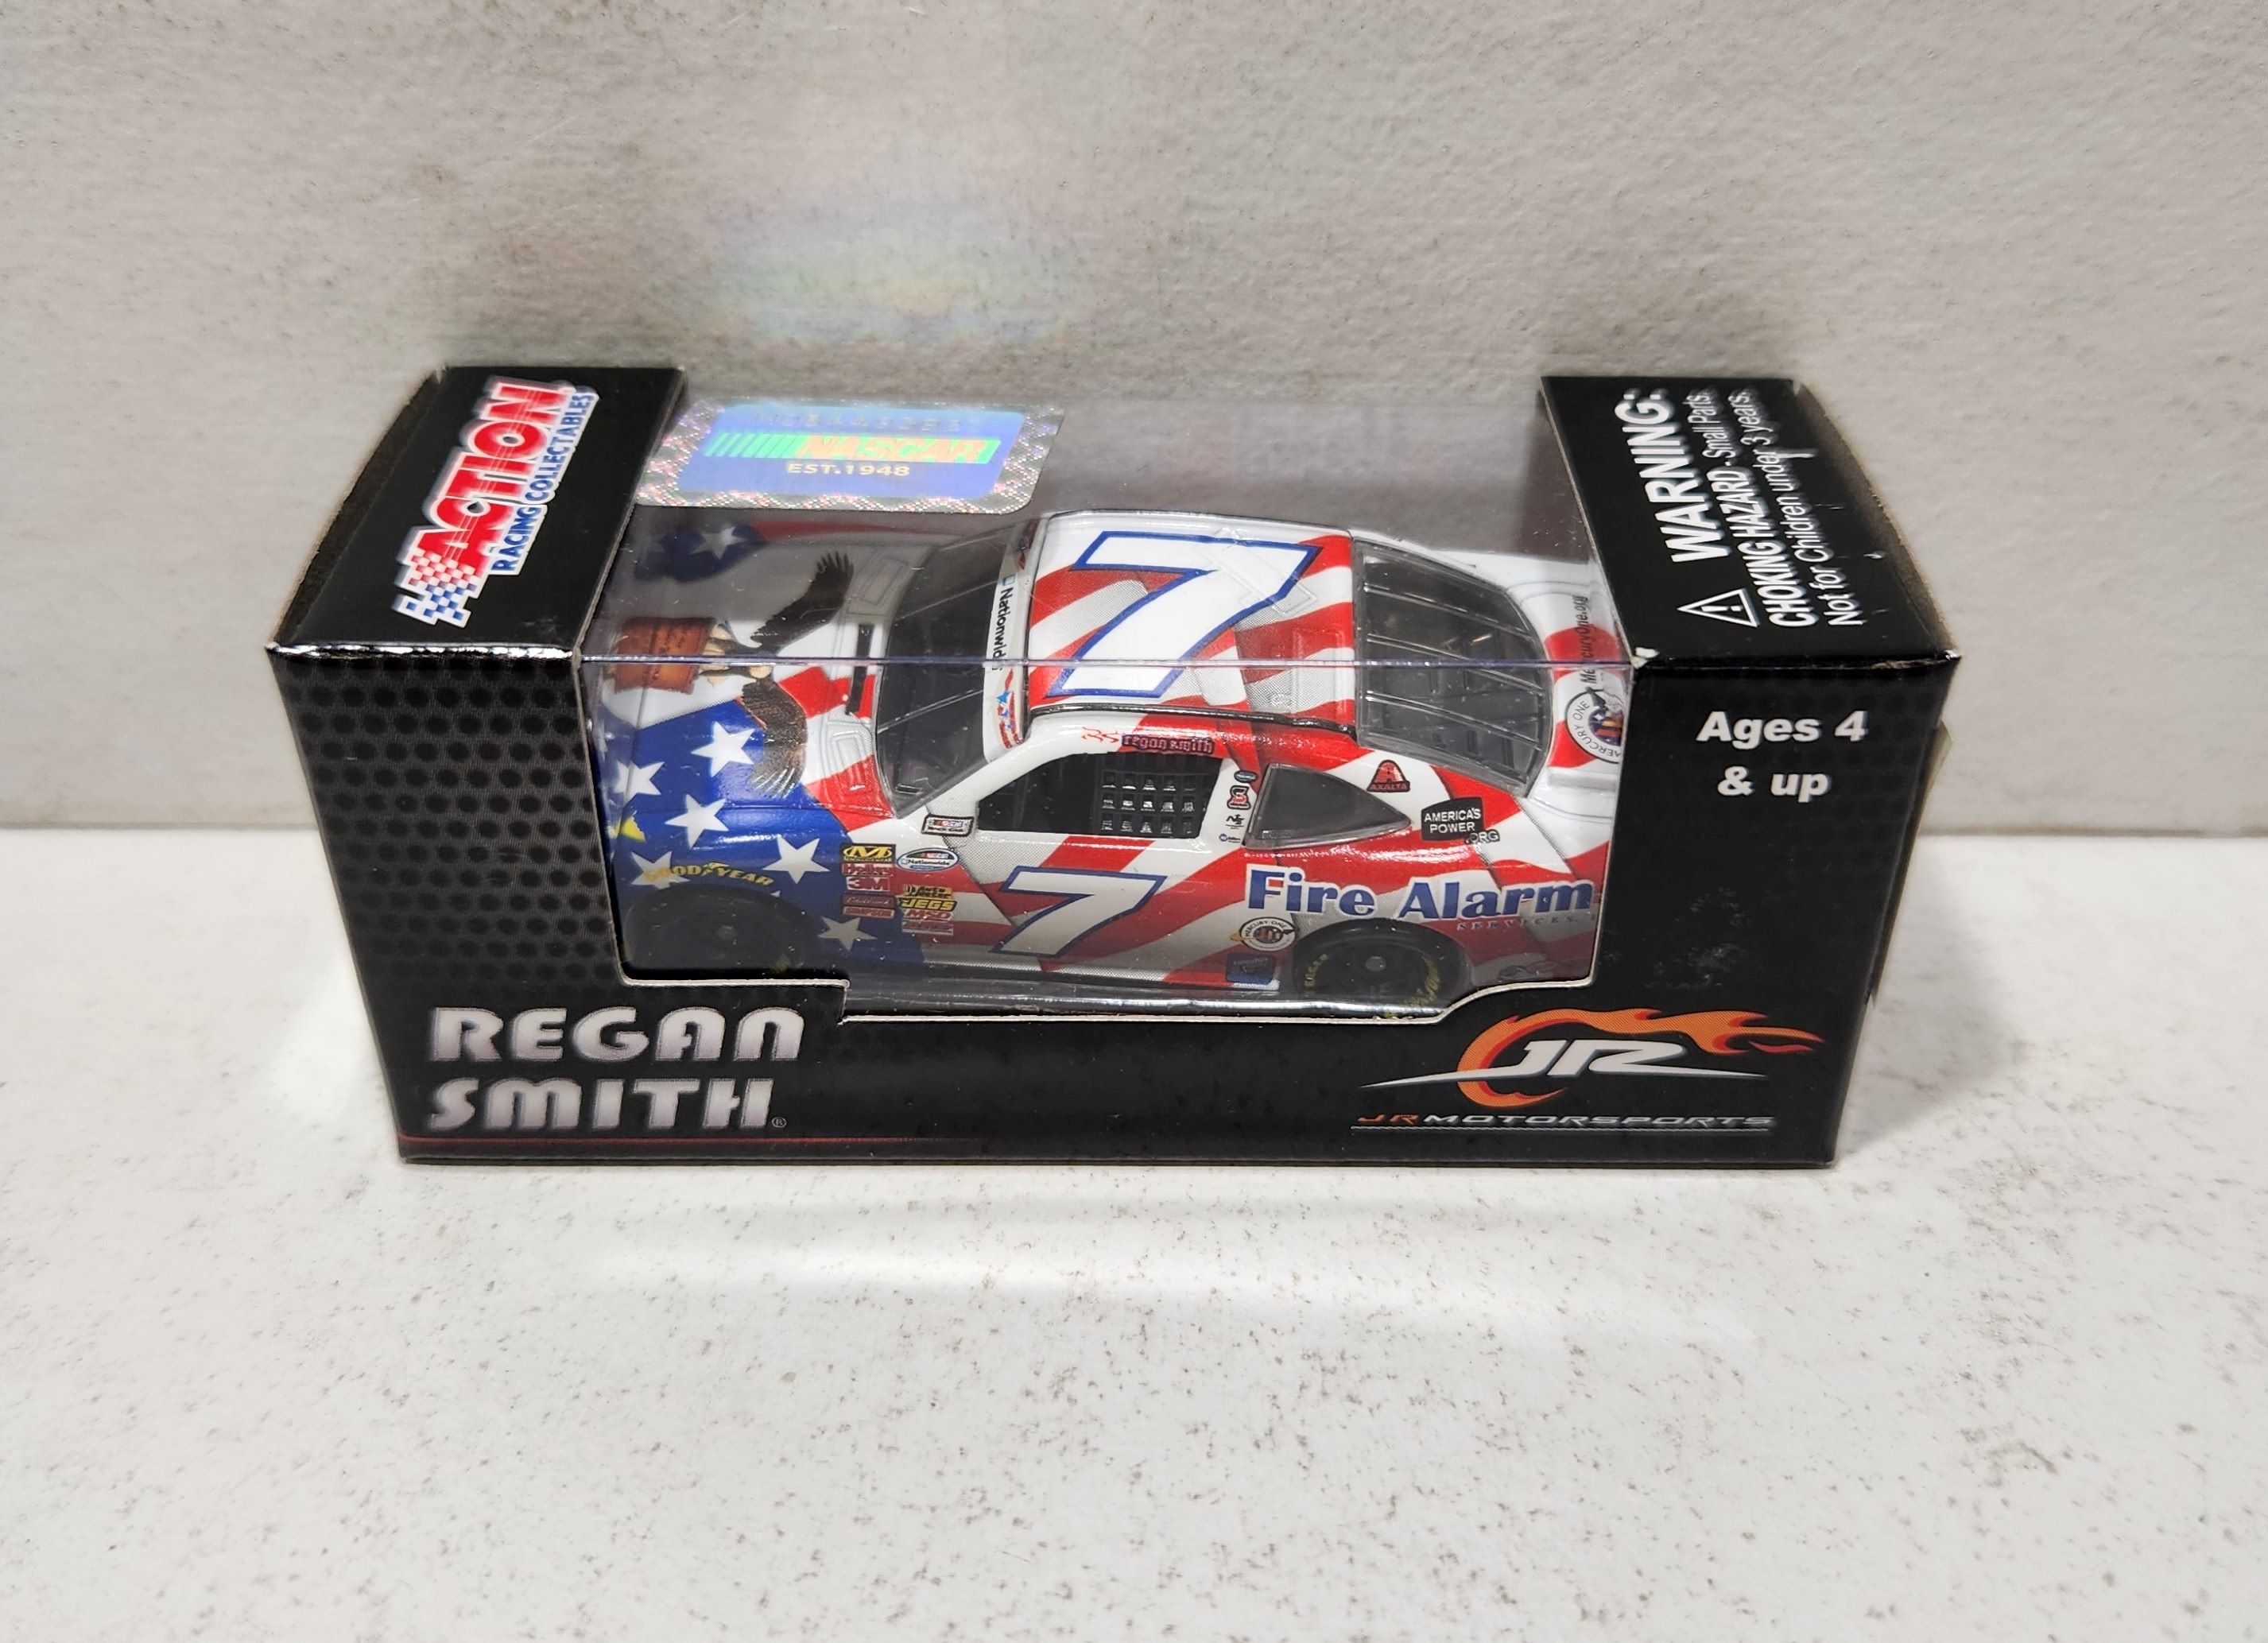 2014 Regan Smith 1/64th Fire Alarm "American Salute" "Nationwide Series" Pitstop Series car